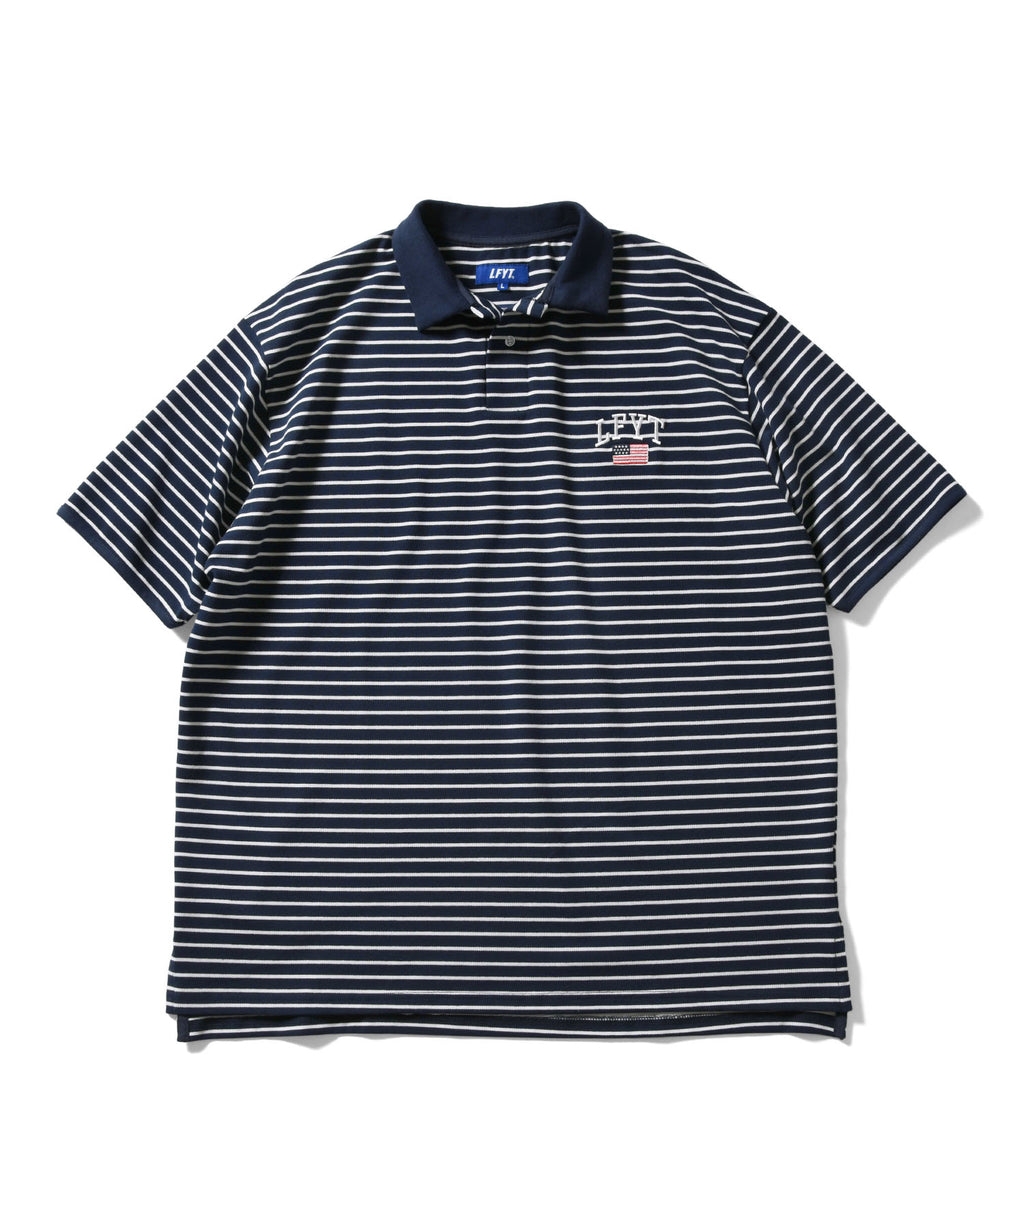 LFYT OLD GLORY ARCH LOGO STRIPED POLO SHIRT LS220301 NAVY